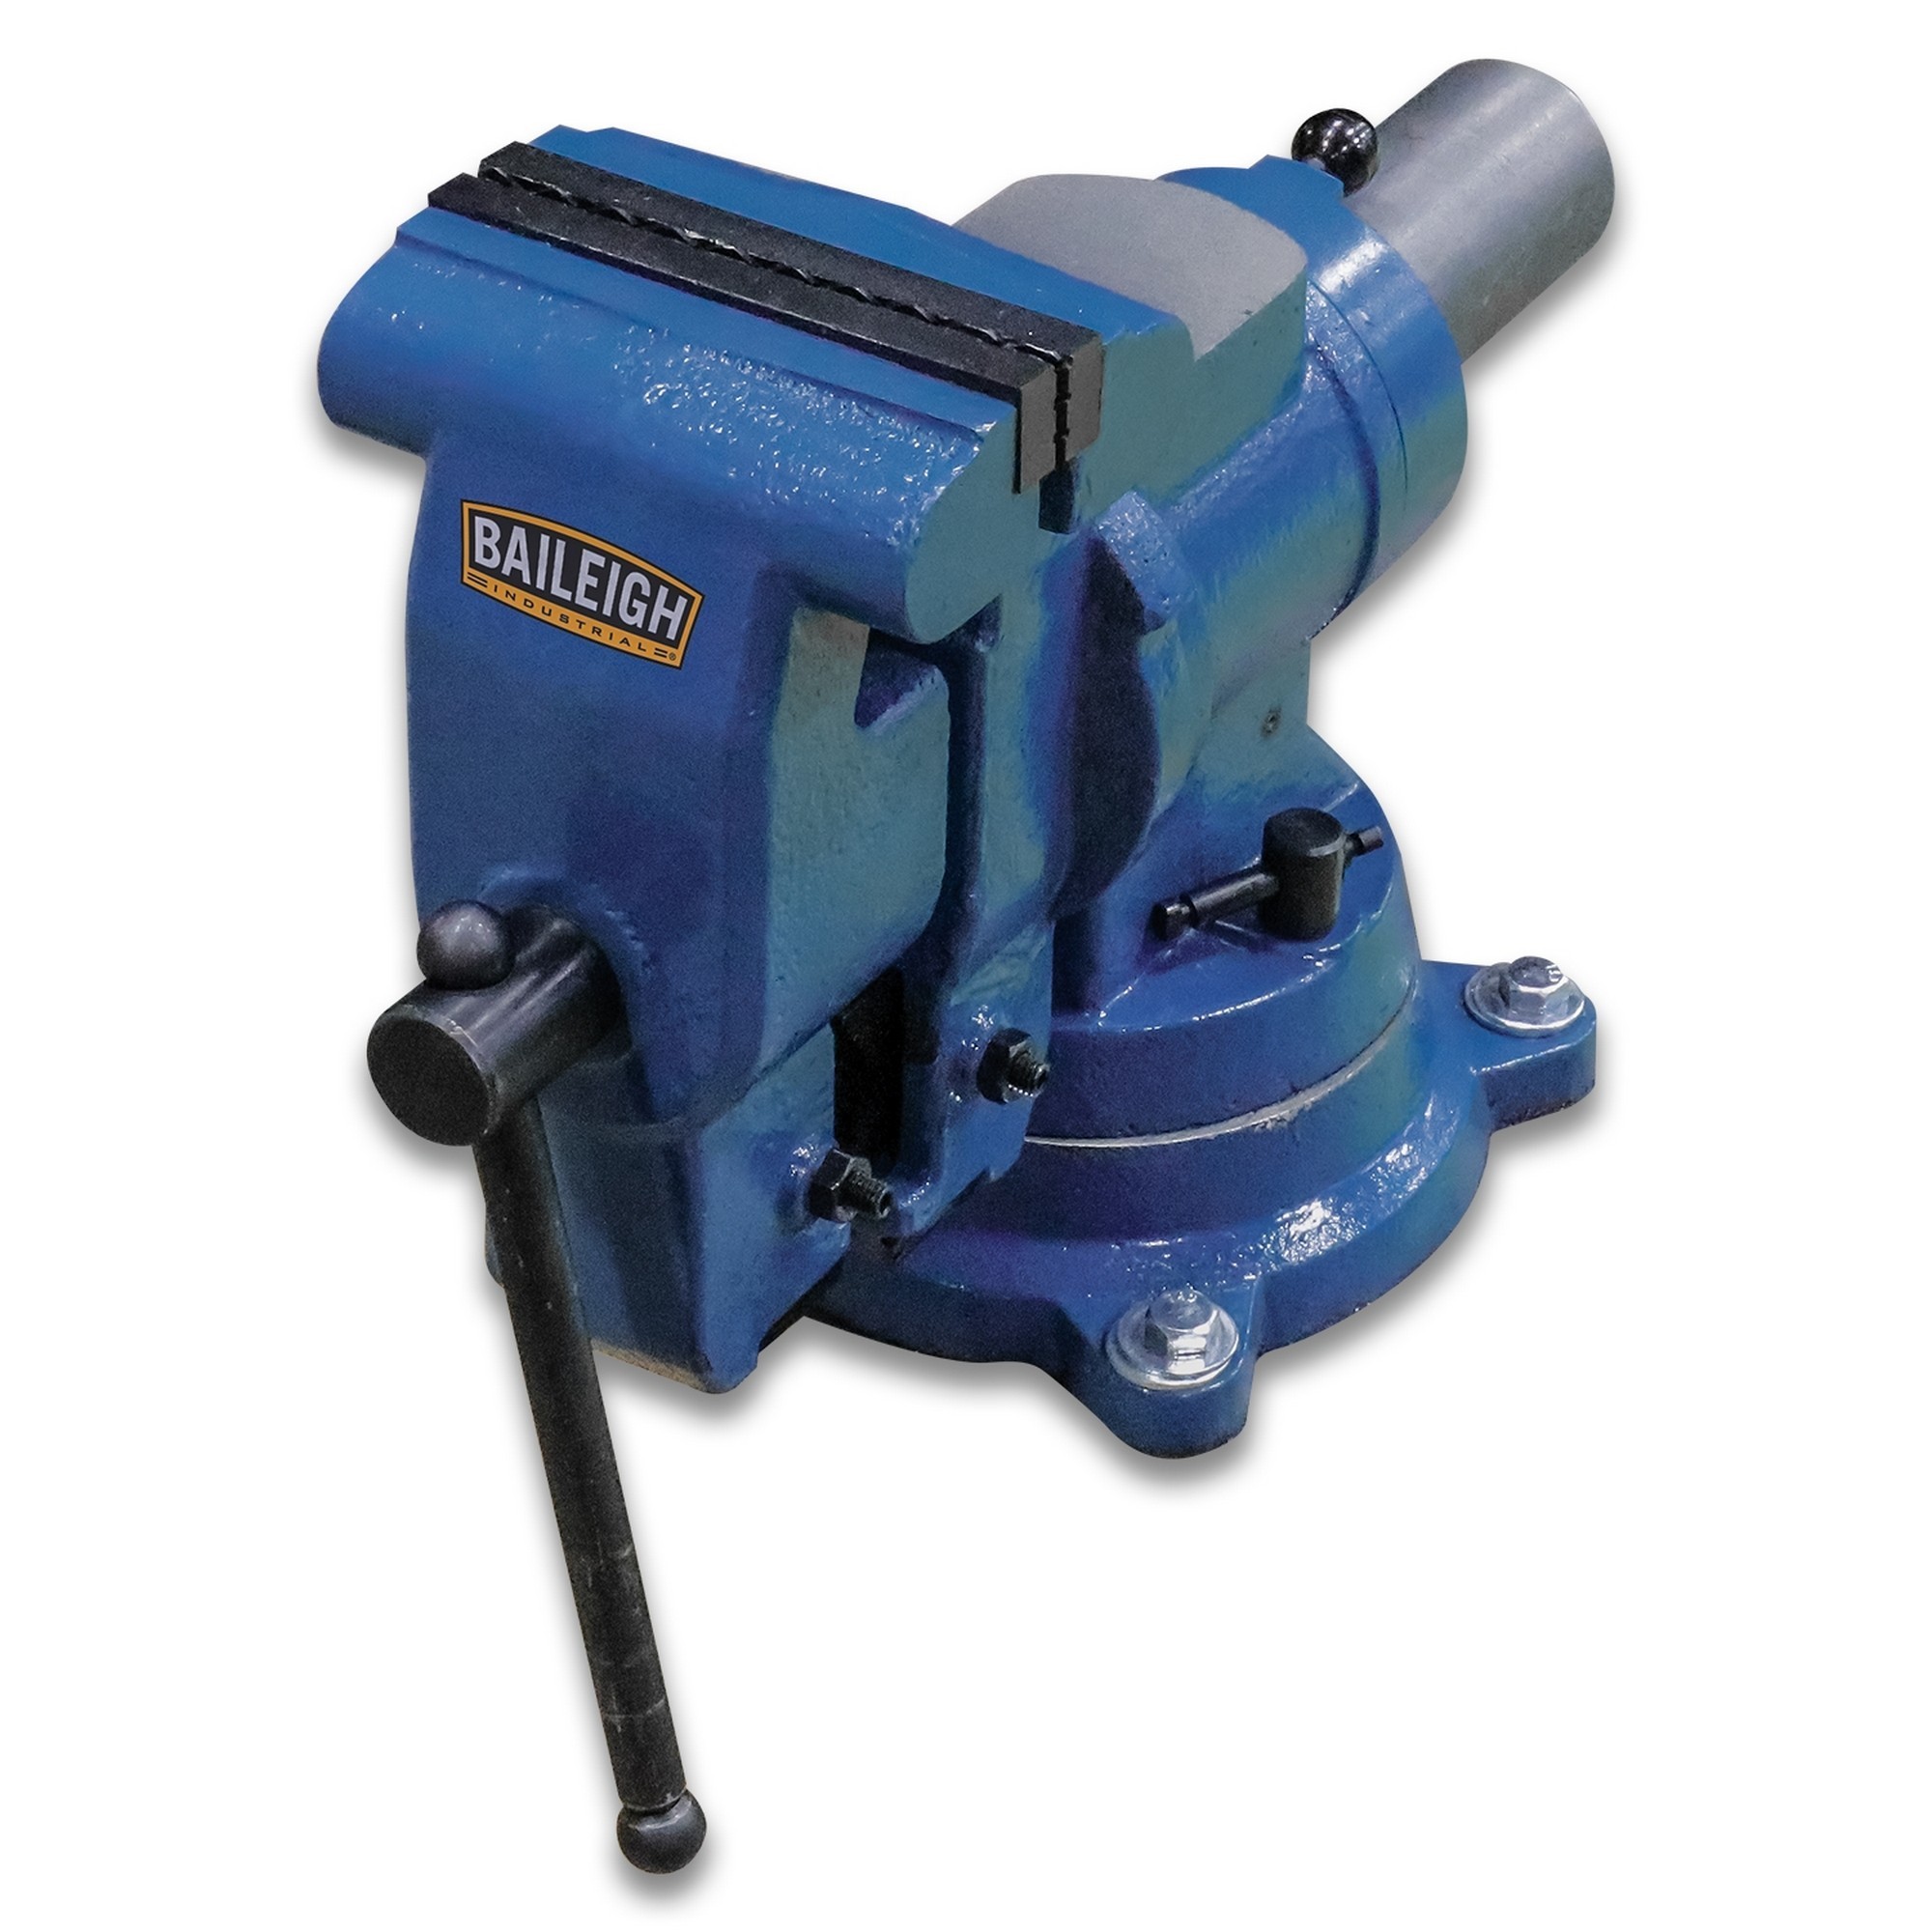 Baileigh, Vise, Jaw Width 5 in, Jaw Capacity 6 in, Model BV-5P